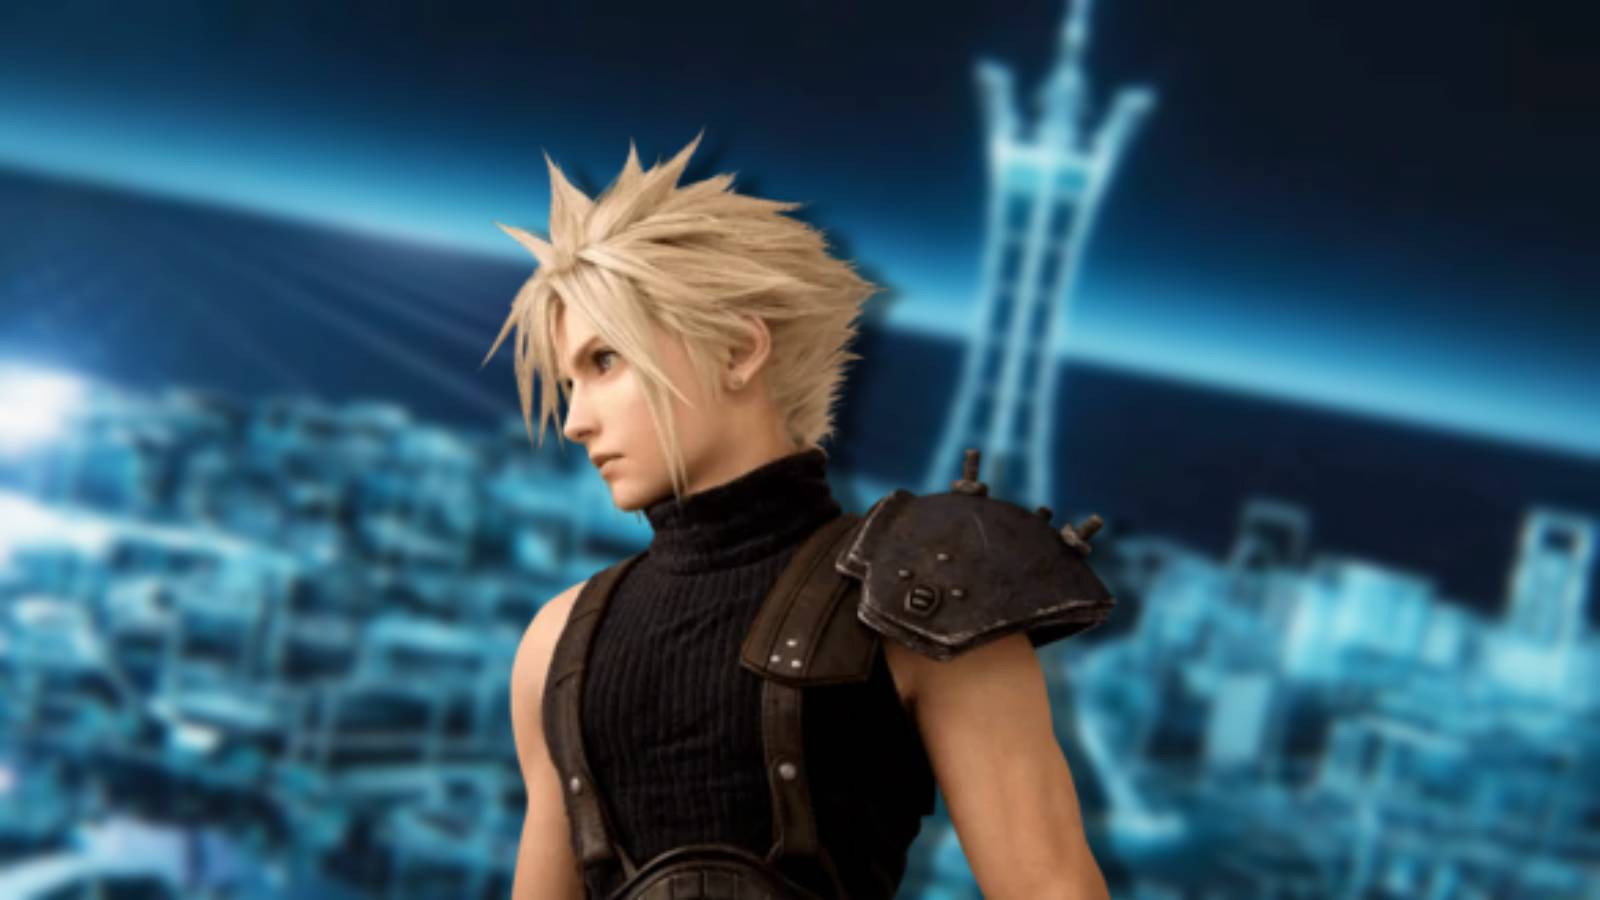 Final Fantasy VII character Cloud appears against a blurred image of Pokemon's Lumiose City